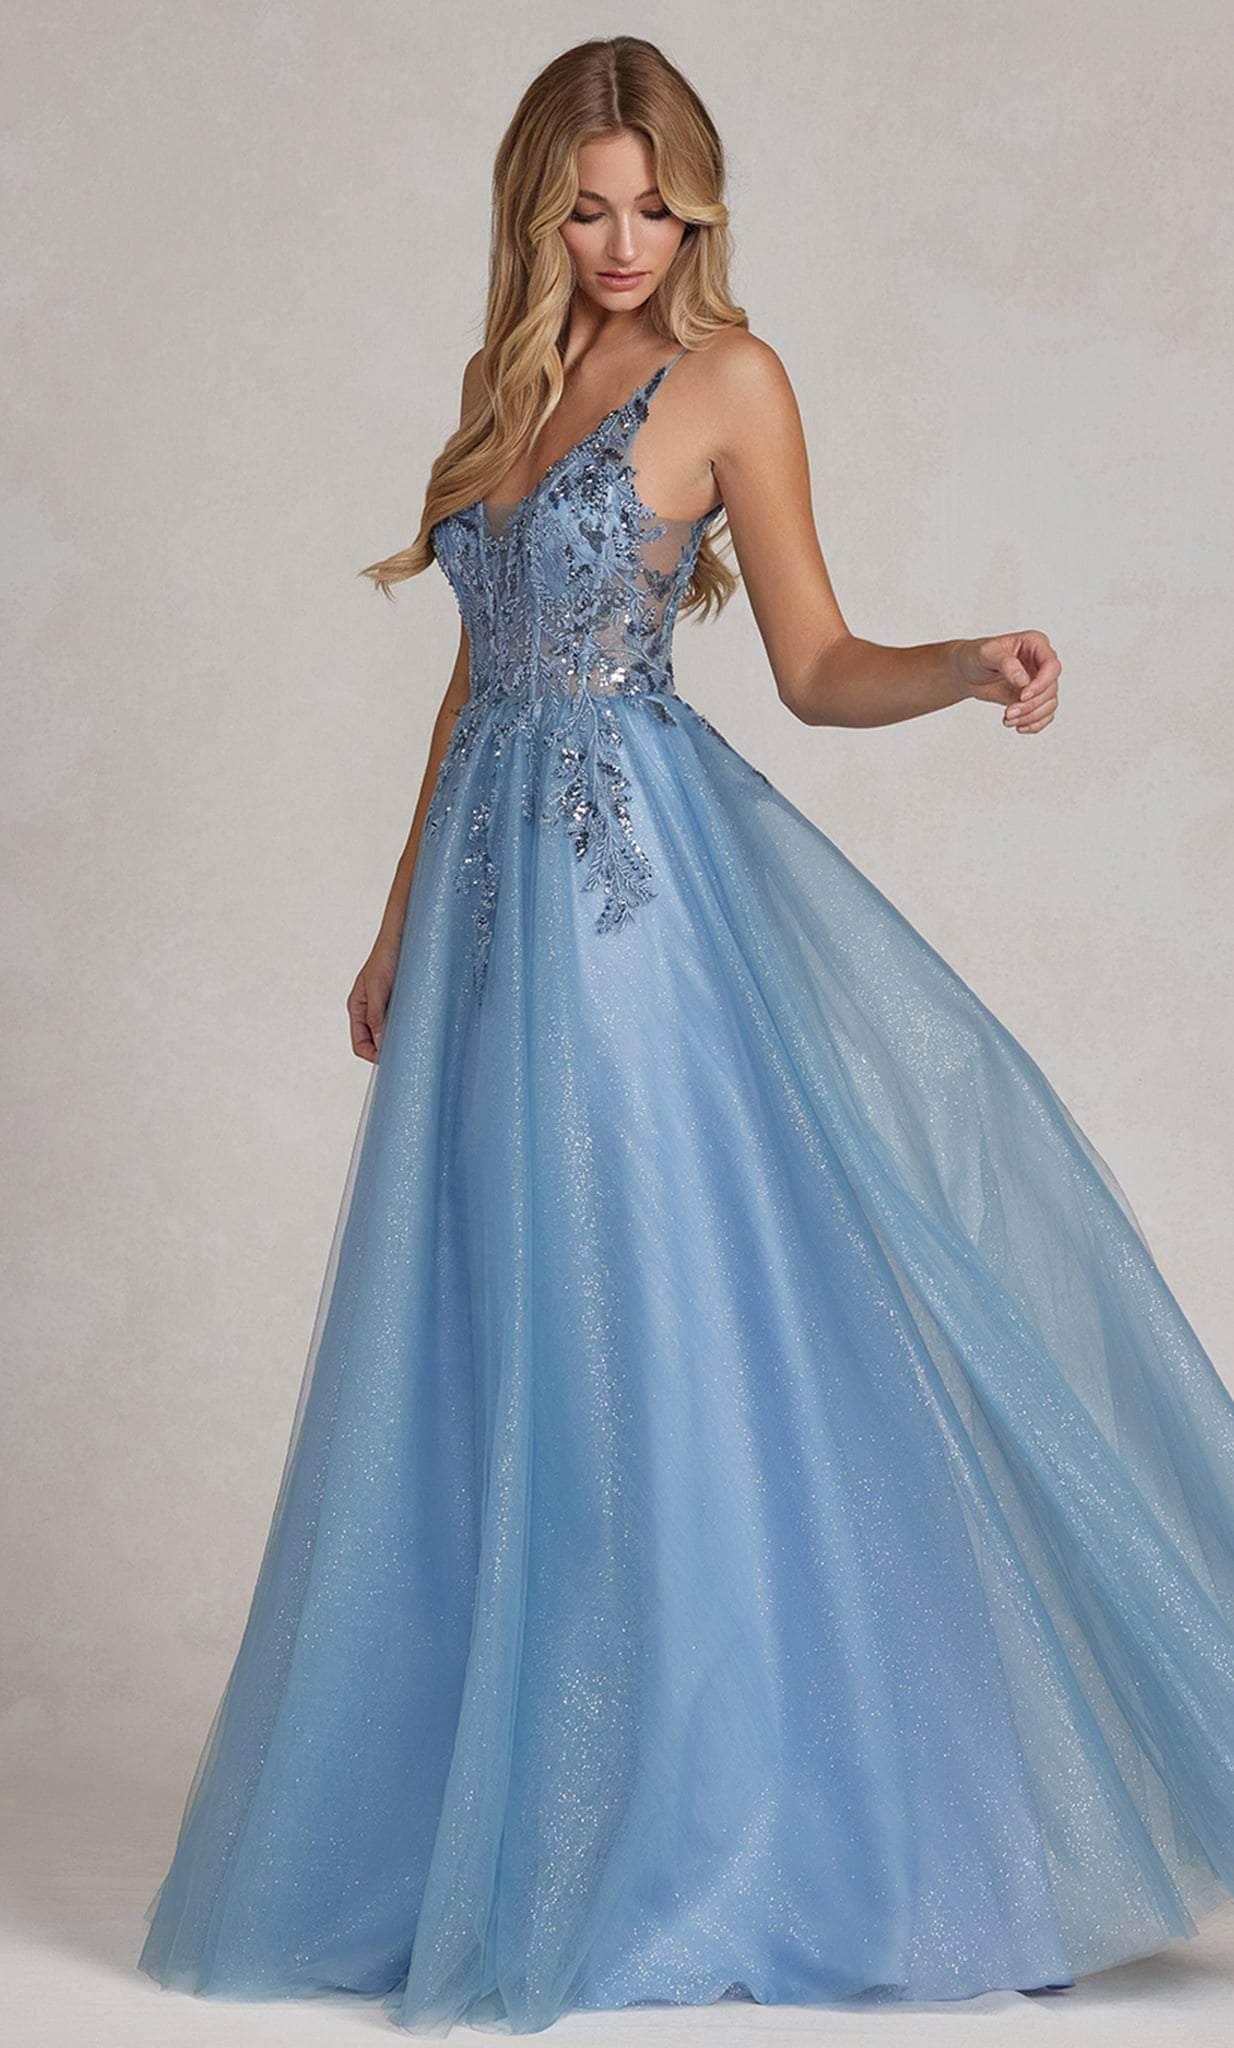 Image of Nox Anabel E1125 - Glittered Tulle Prom Dress